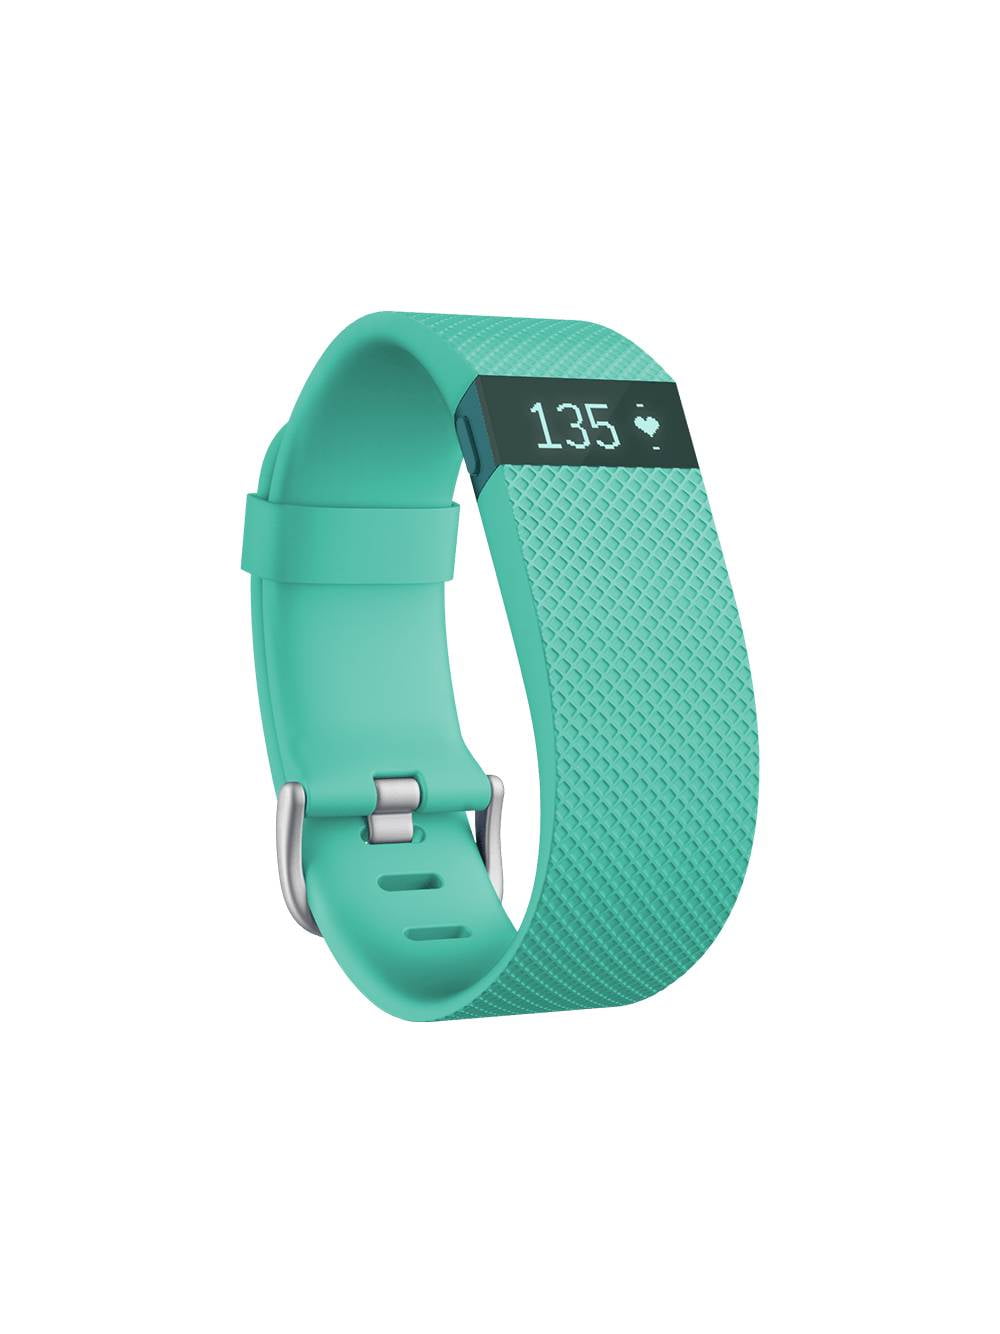 Fitbit Charge HR Wireless Activity Wristband Plum Size S Fb405p for sale online 